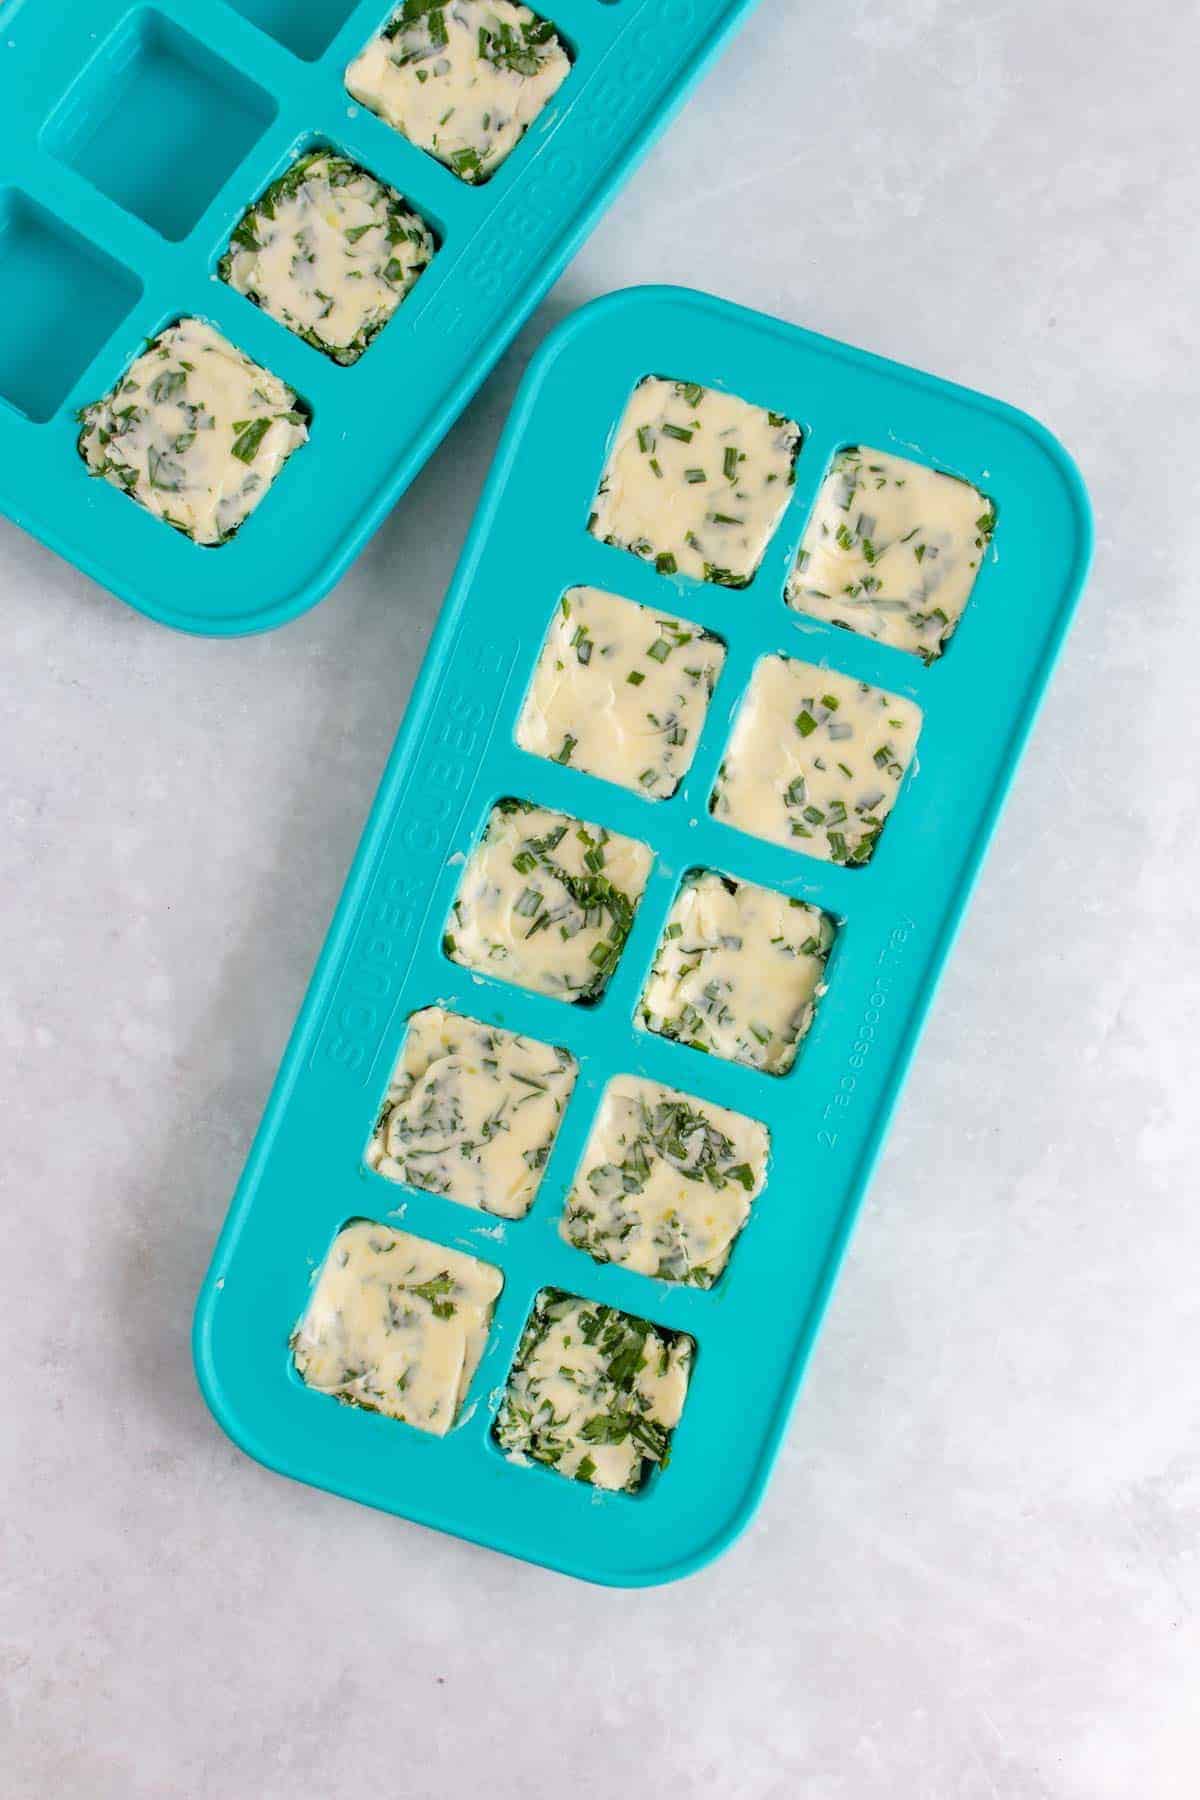 Compound herb butter in souper cubes containers.